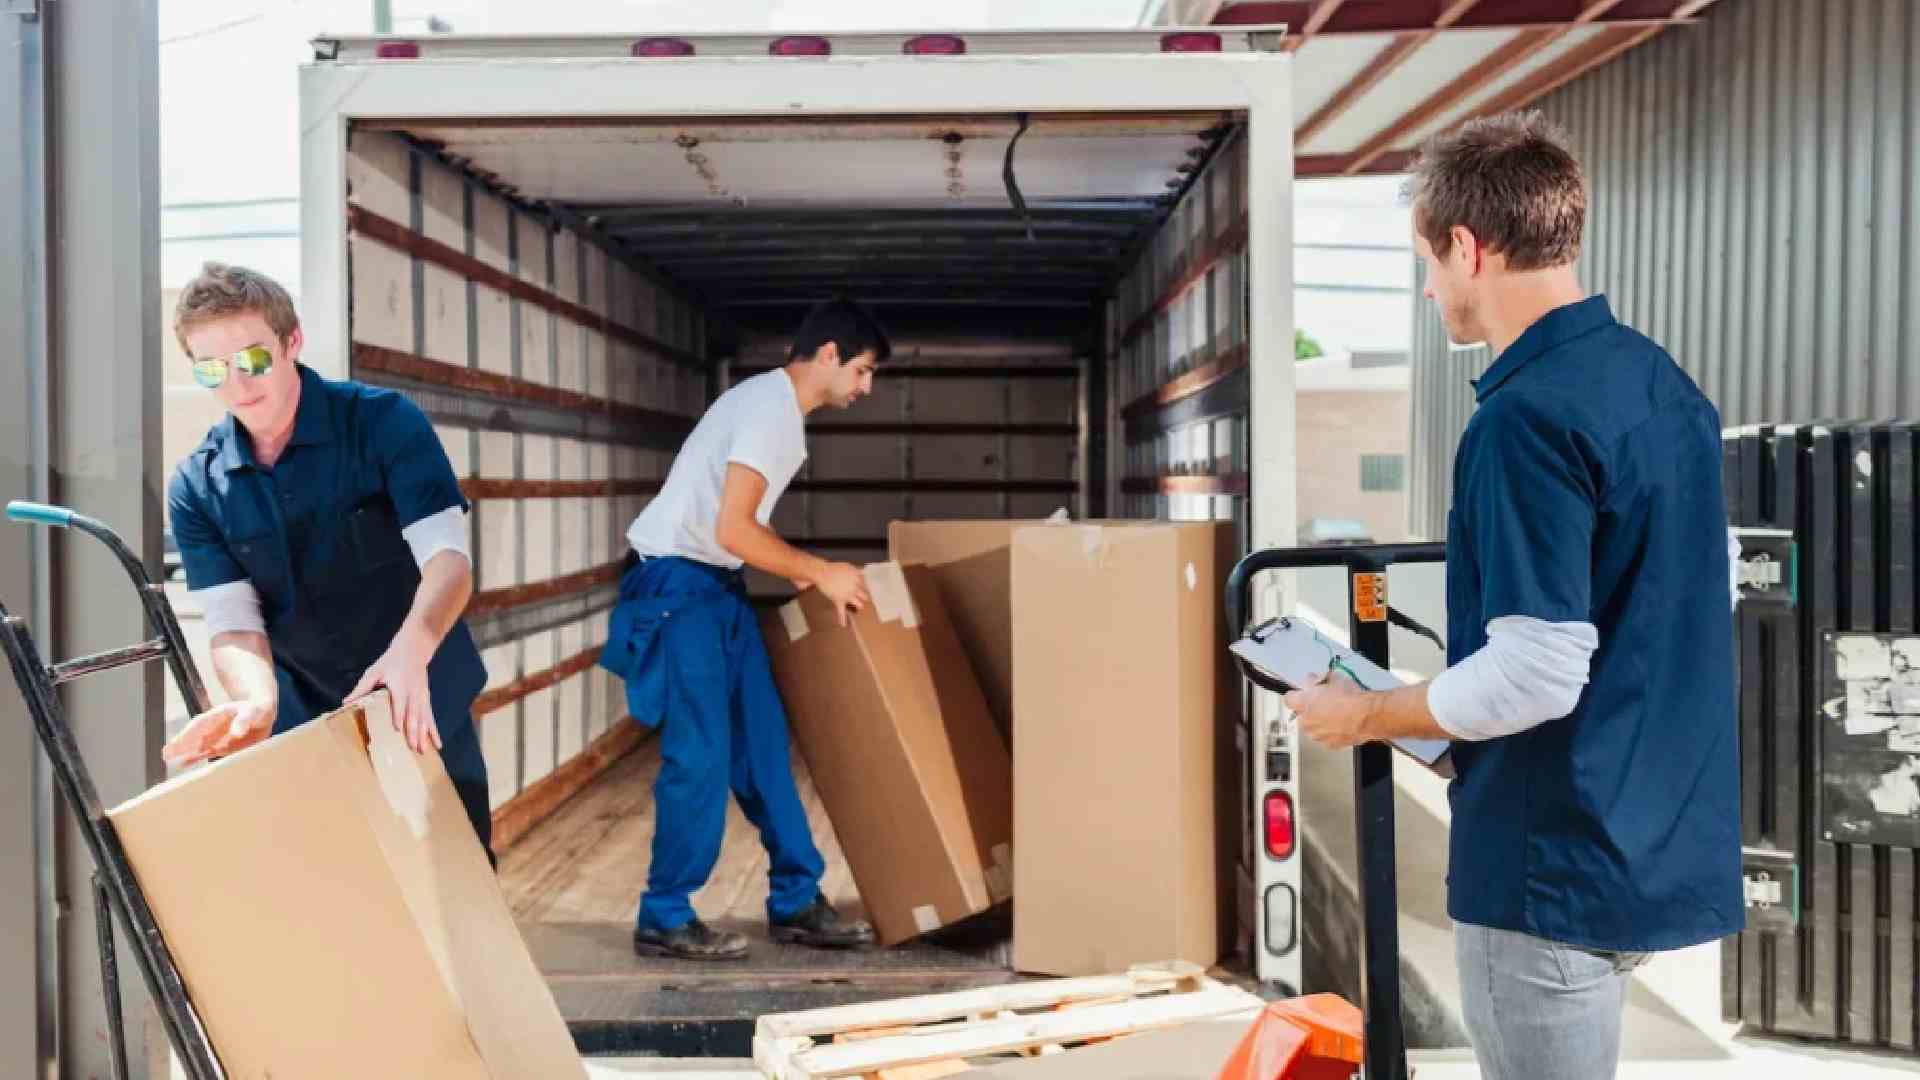 movers and packers in JLT